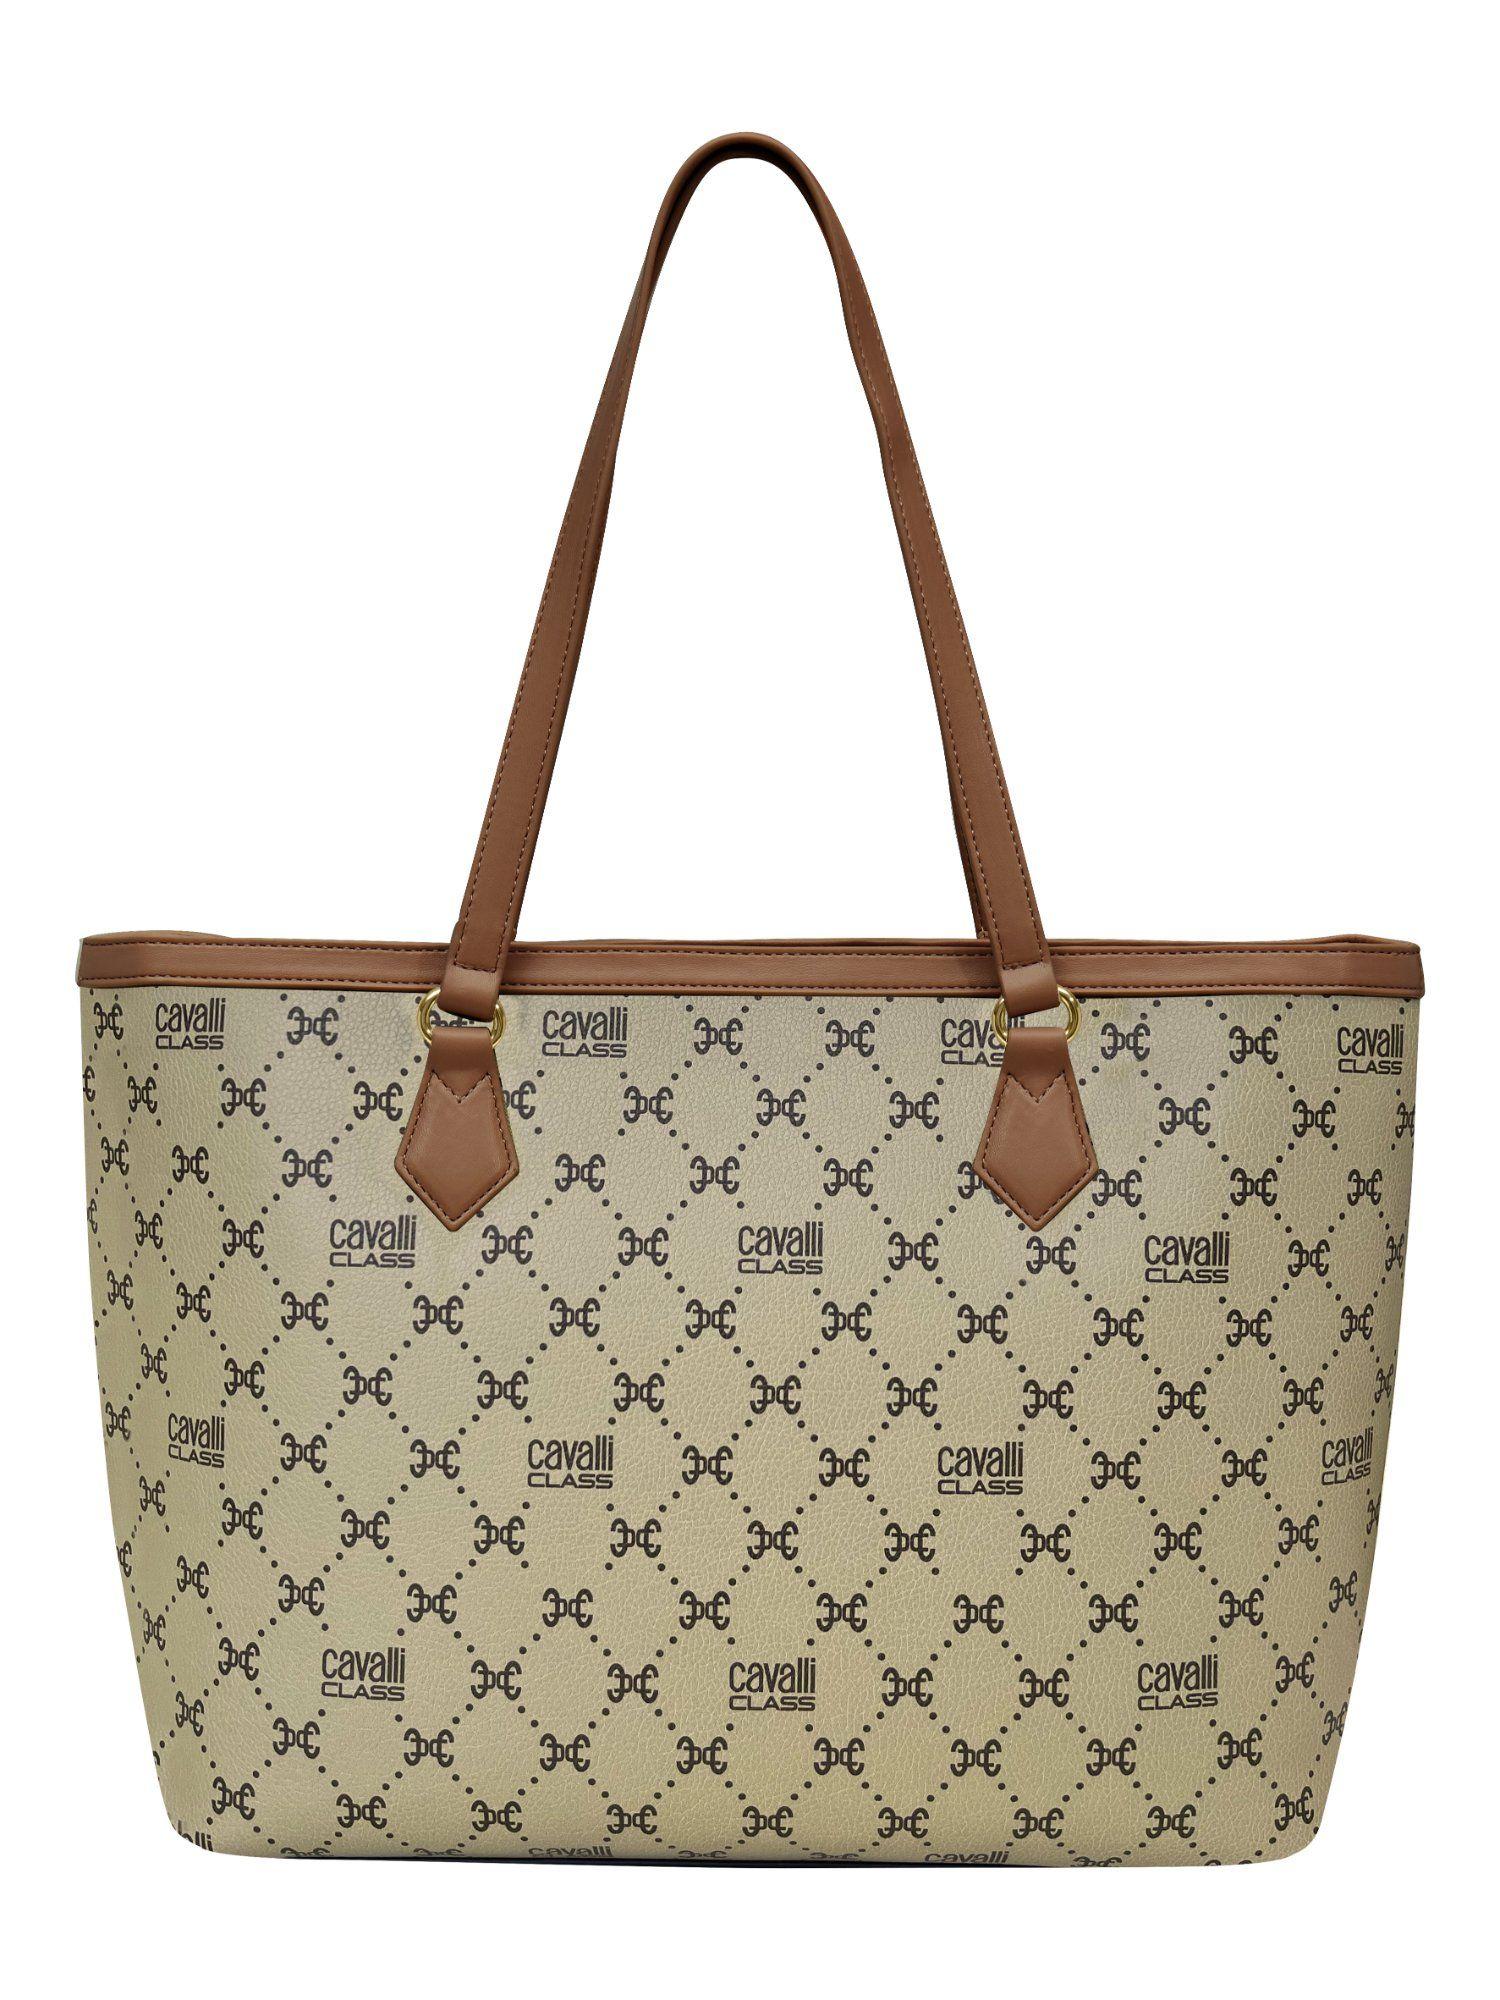 paola synthetic leather brown printed tote bag